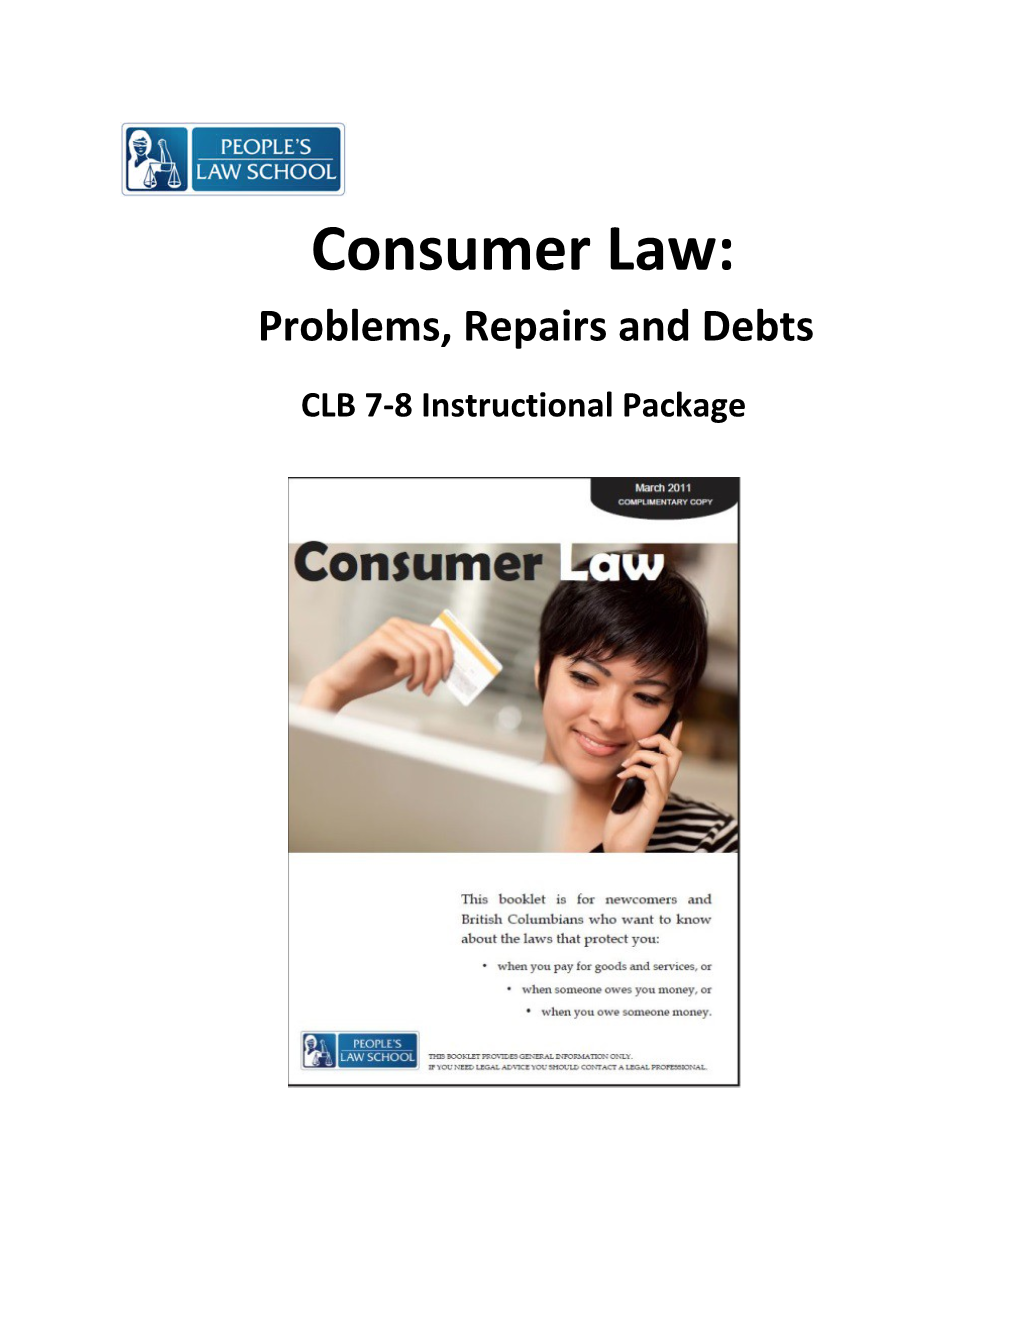 Lesson Plan: Problems, Repairs and Debt (CLB 7-8)